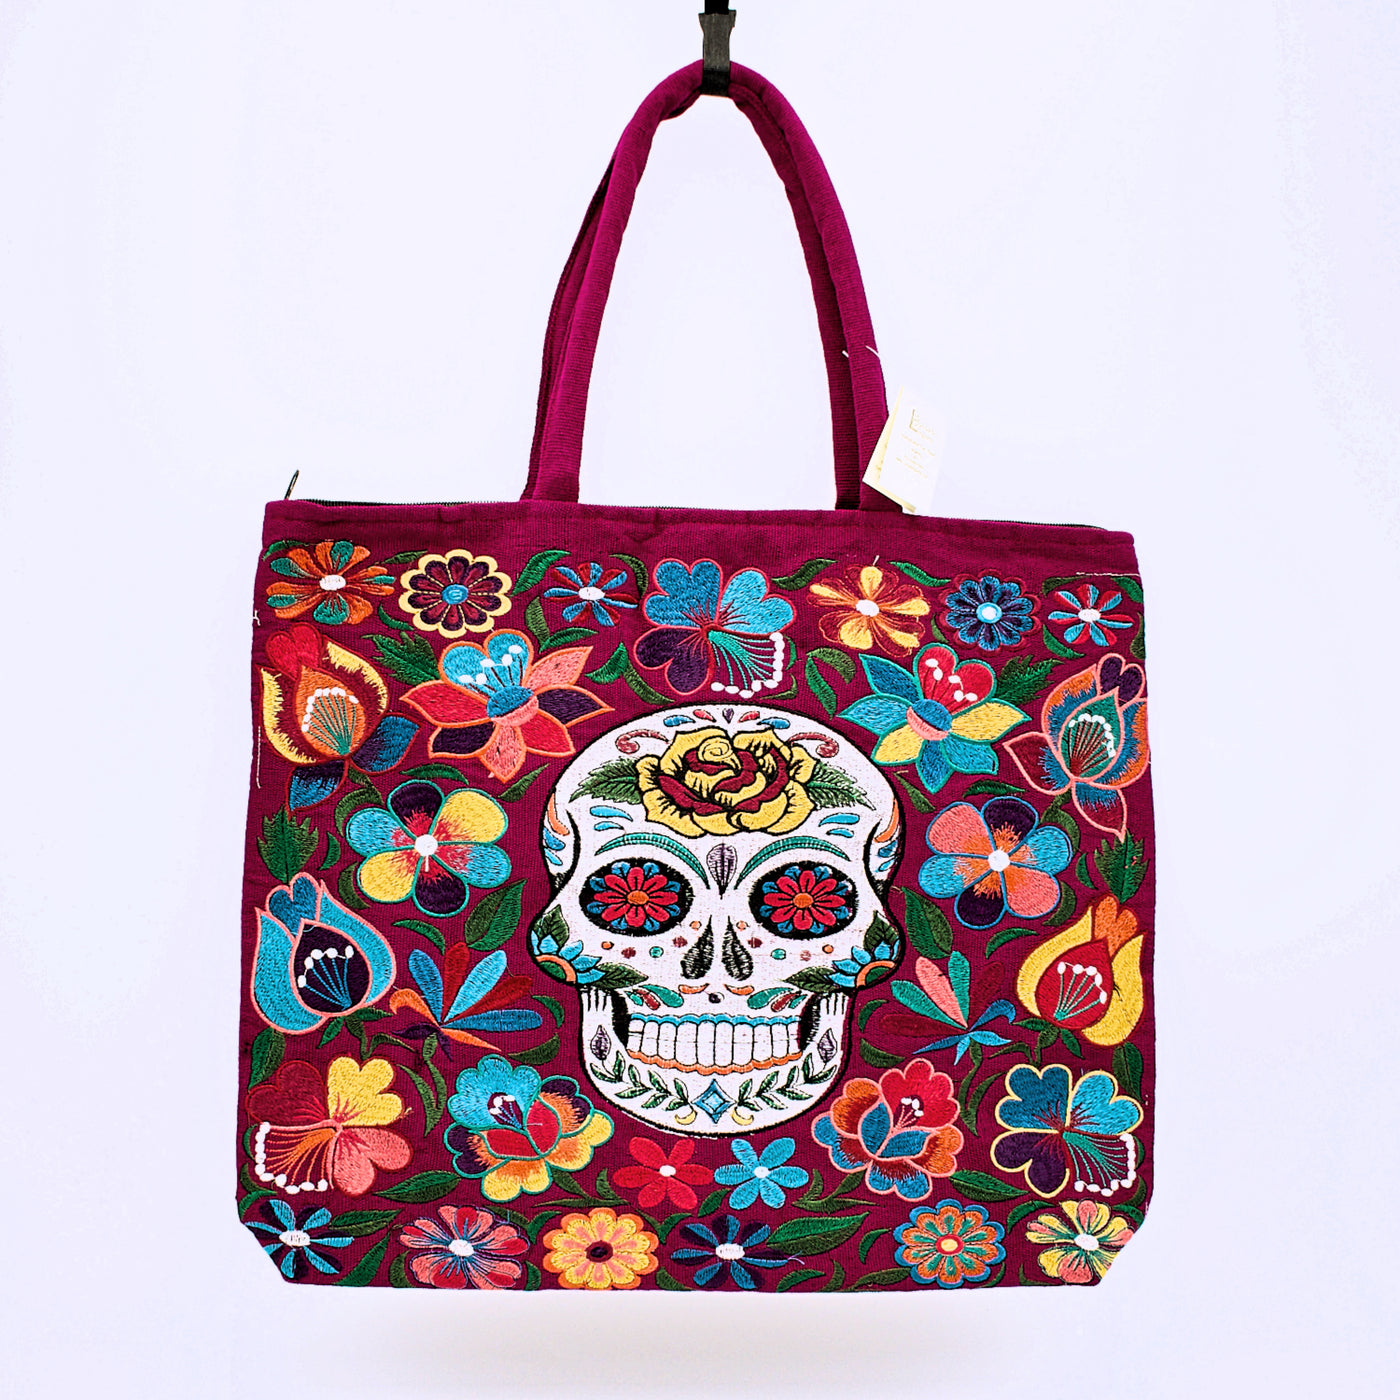 Embroidered Sugar Skull Zippered Cotton Tote Bag - The Cranio Collections